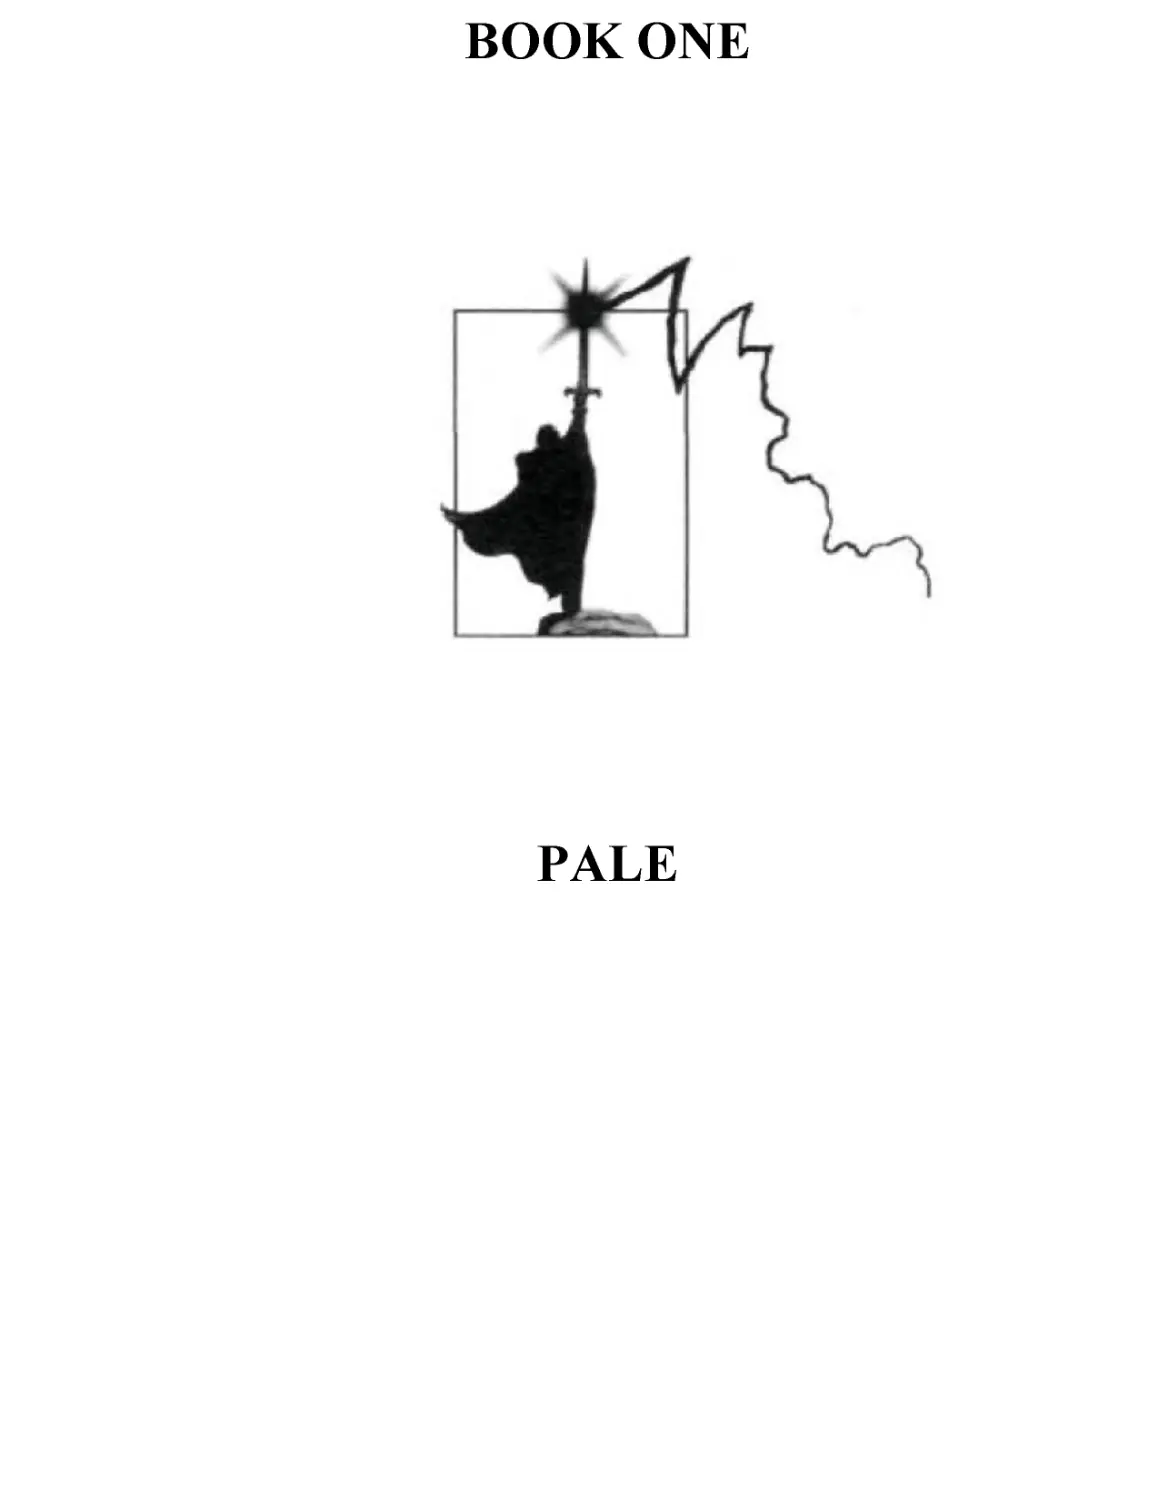 BOOK ONE: PALE